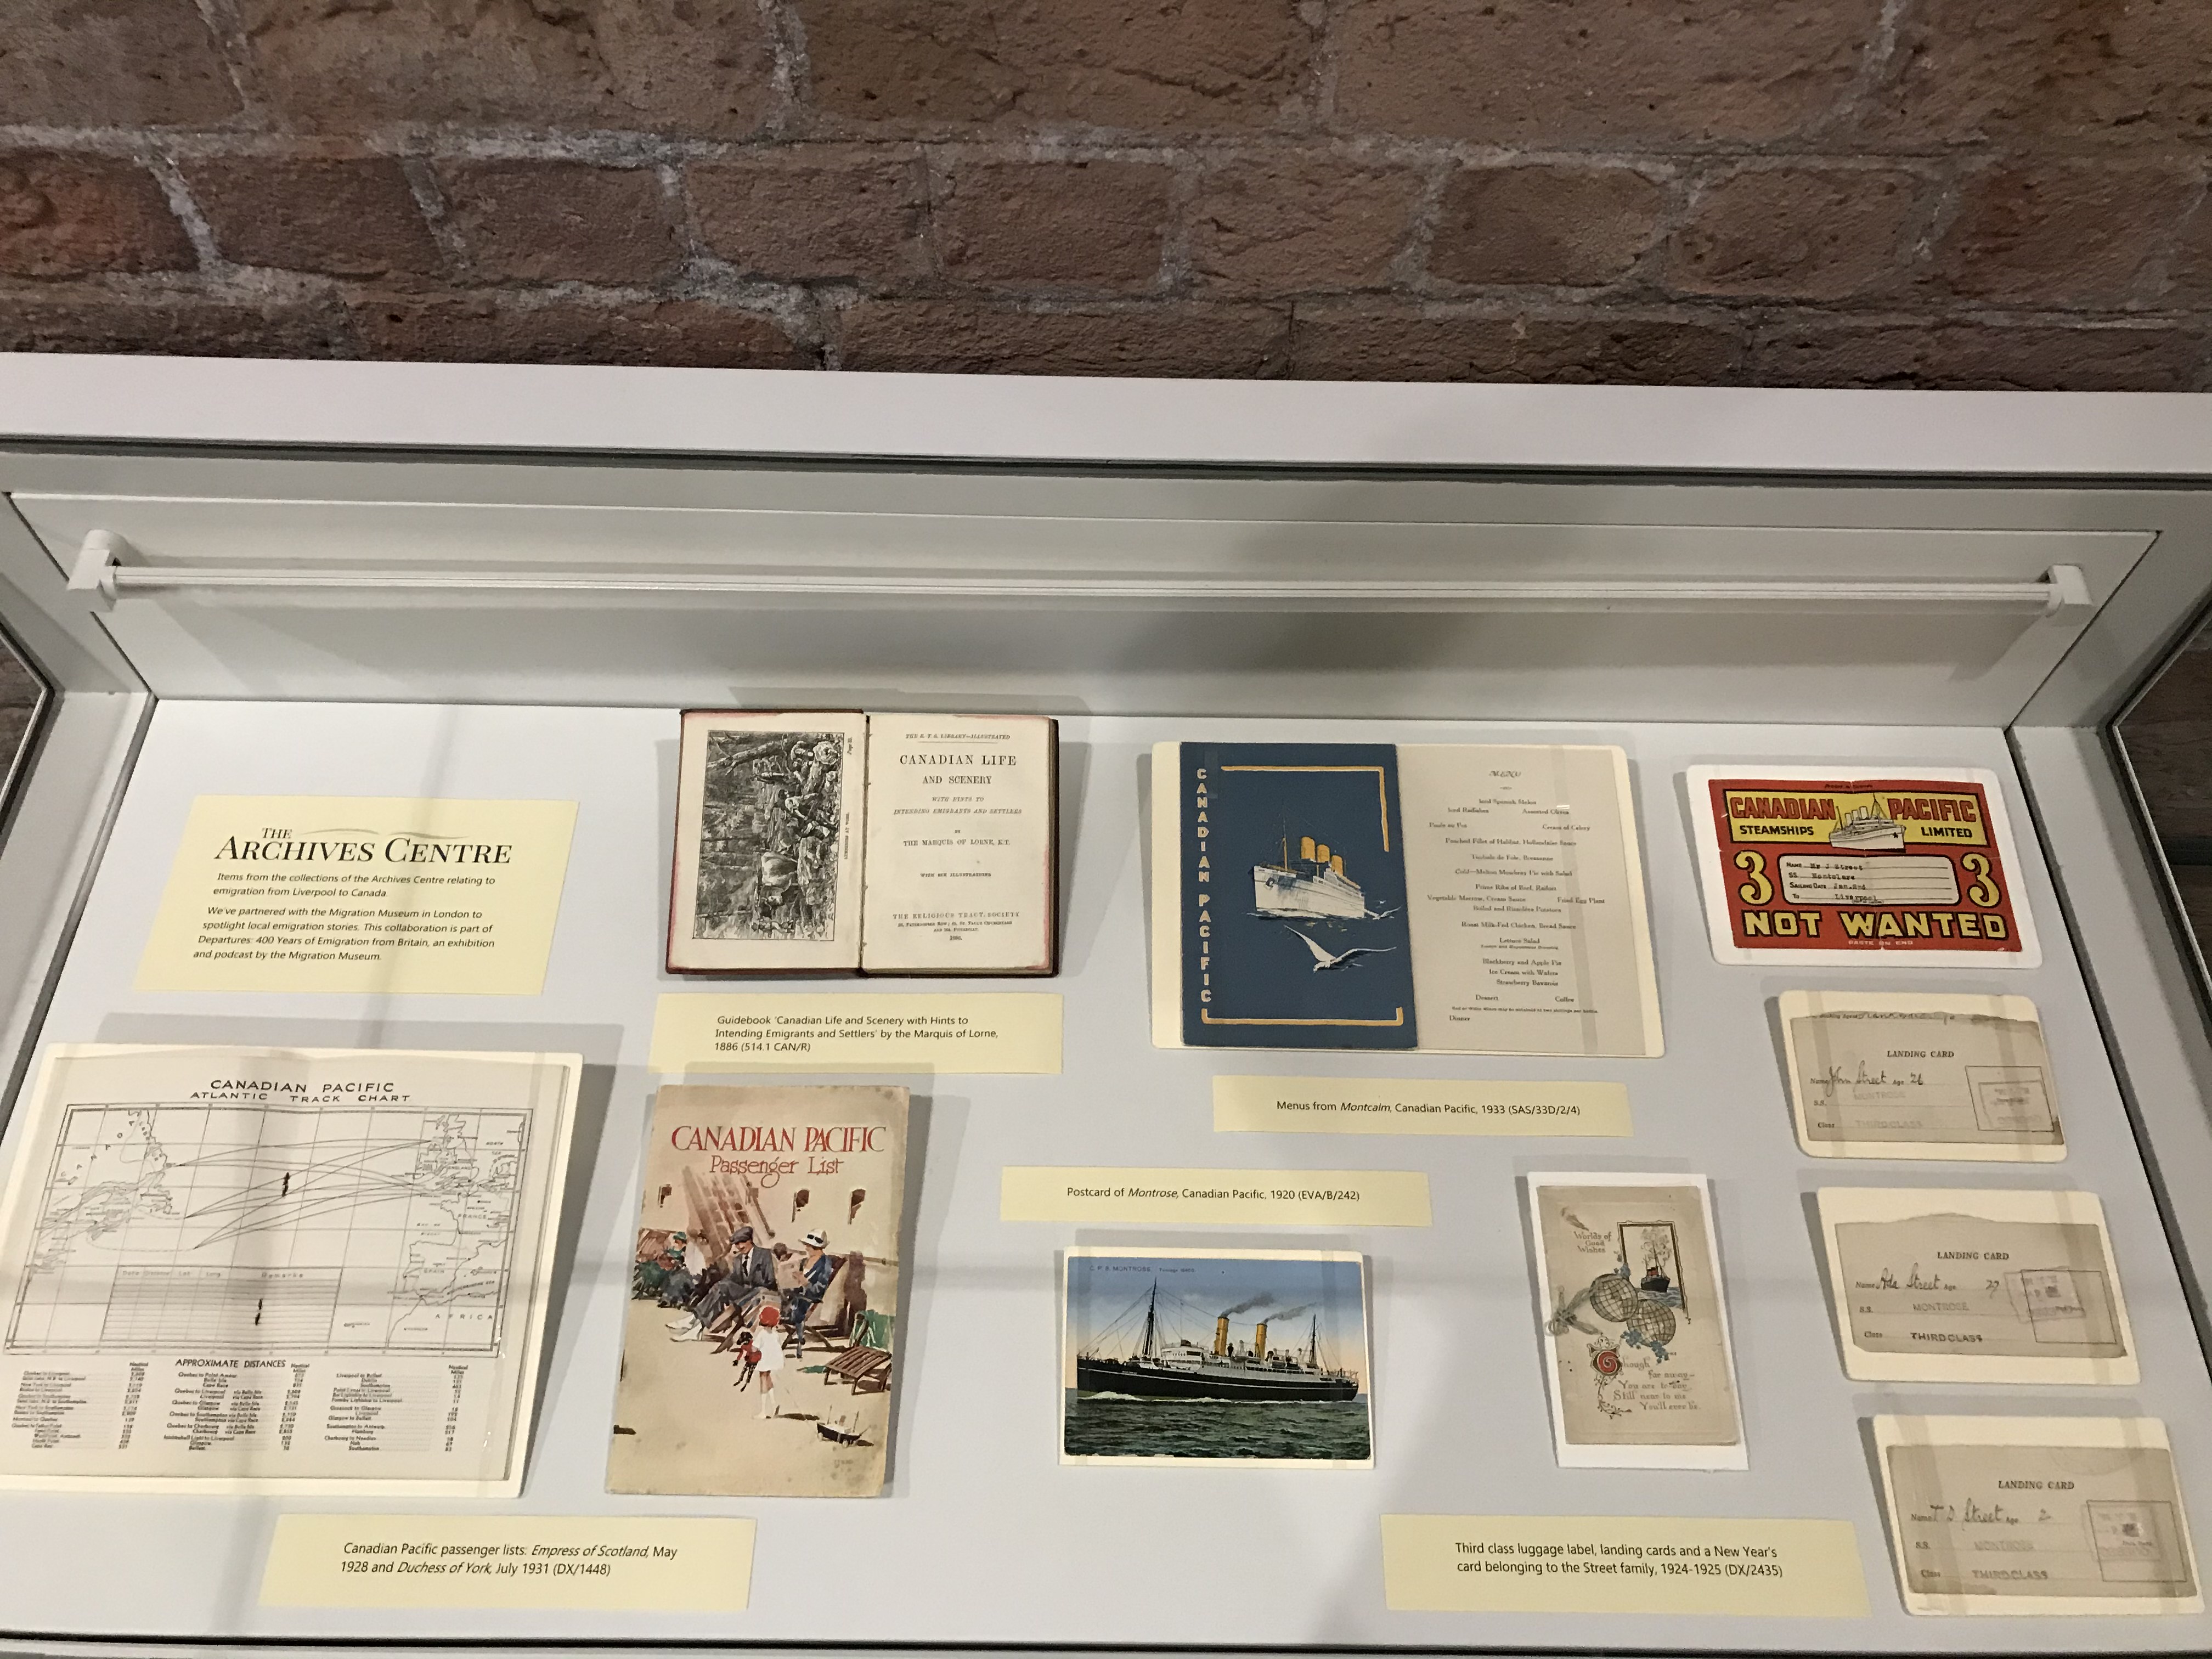 An image depicting some of the archive work completed by Kickstarters at the Maritime Museum archive centre.